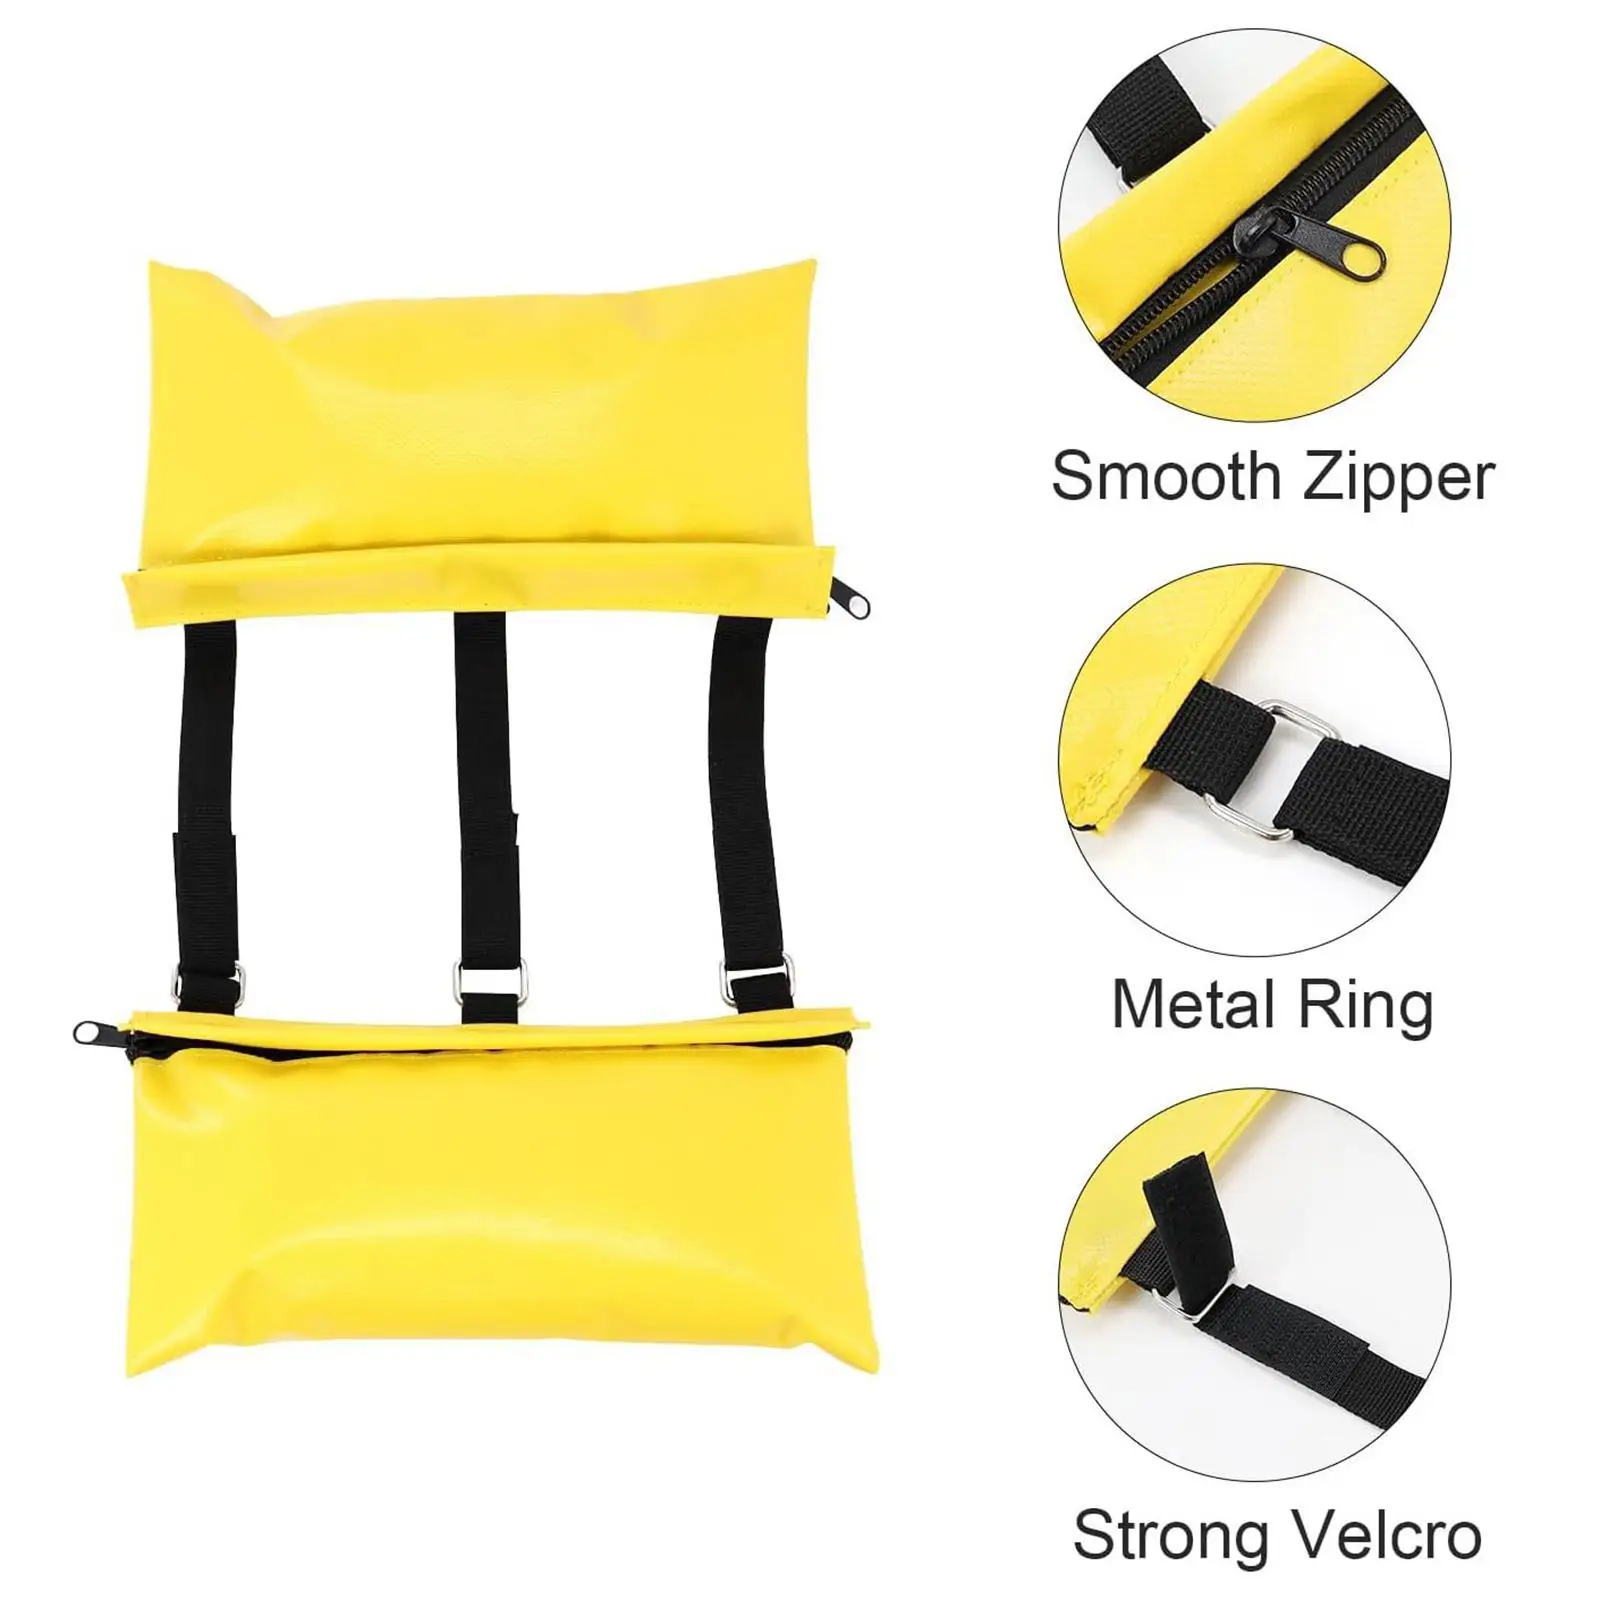 Sewer Weight Bag Camping Sewer Accessory RV Durable Septic Hose Weight Bag